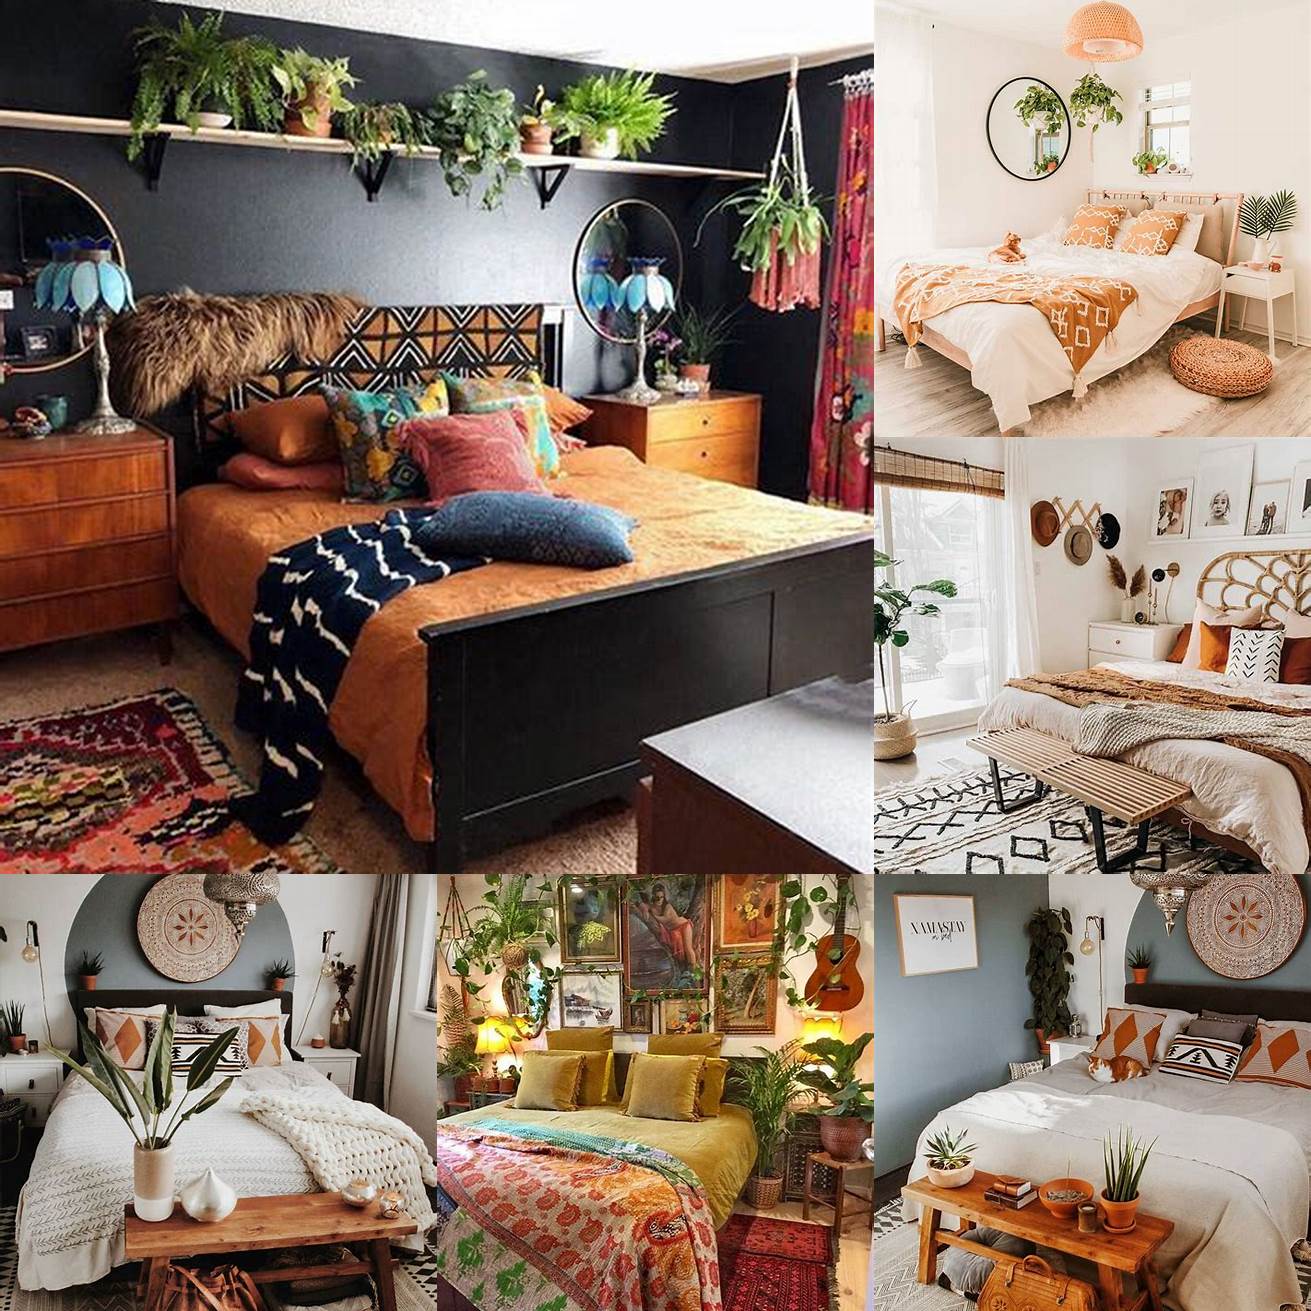 Boho bedroom with patterned textiles